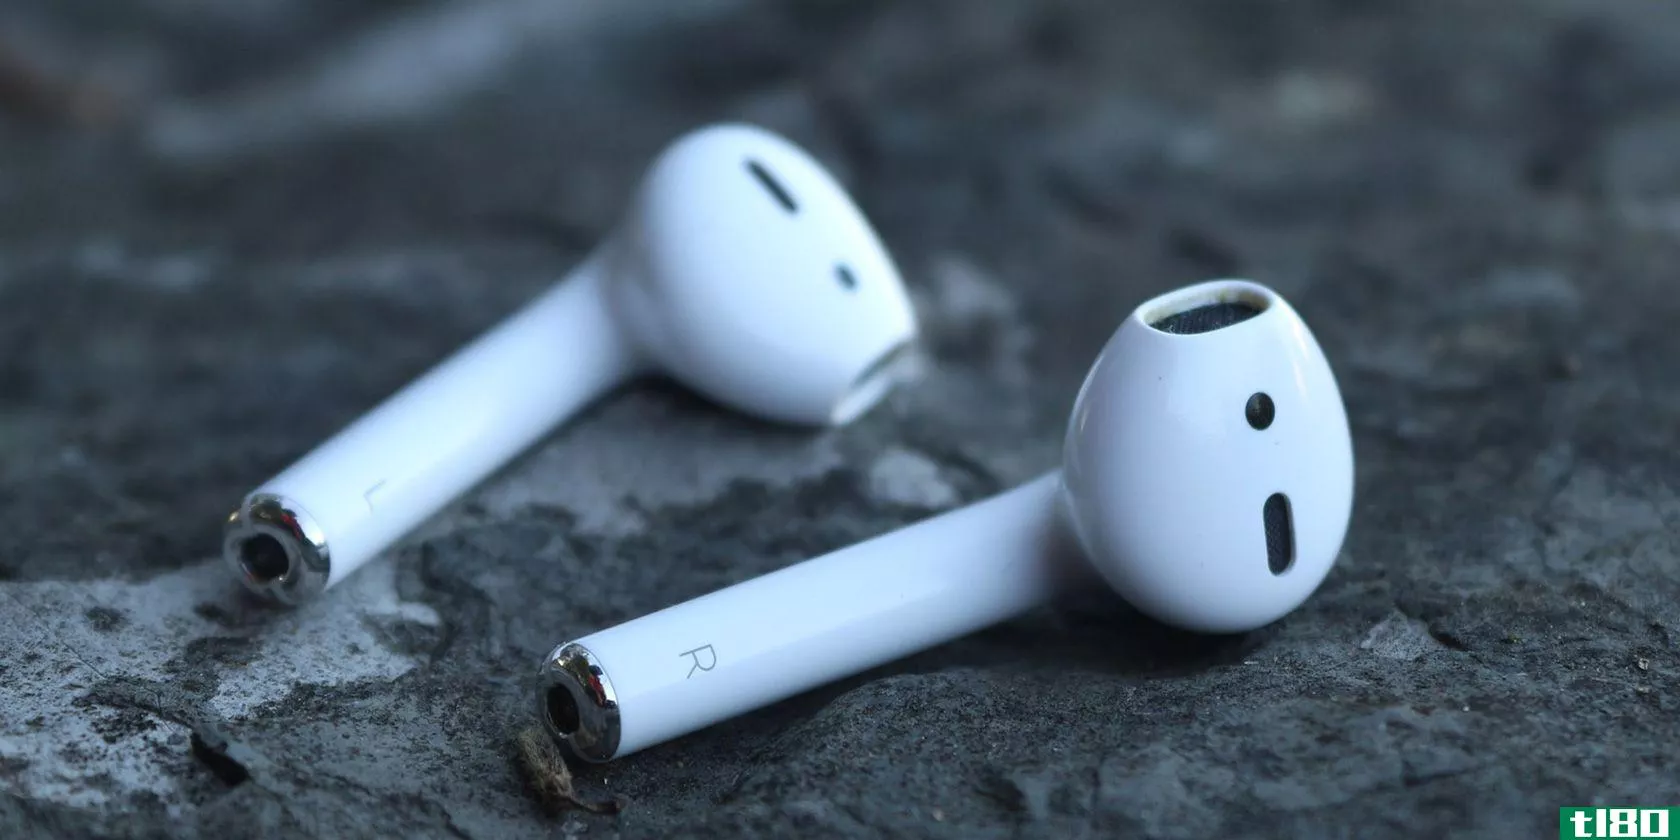 Fix it when one AirPod is not working